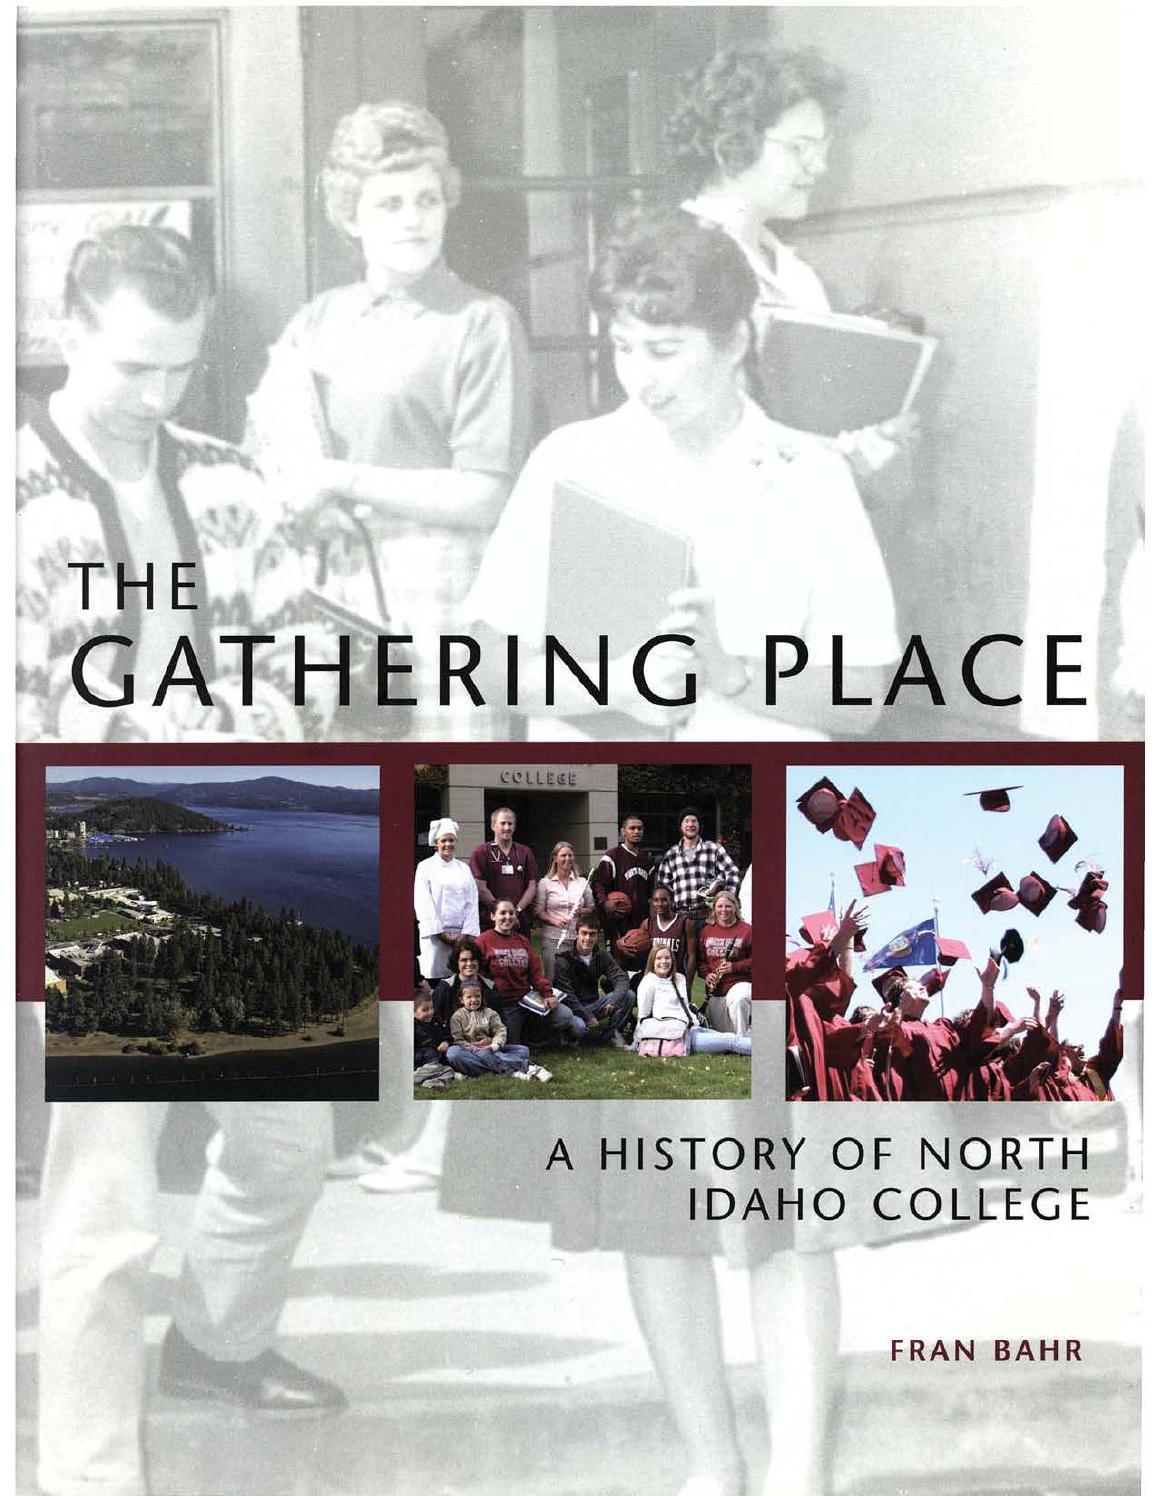 The gathering place: A history of North Idaho College (book cover)